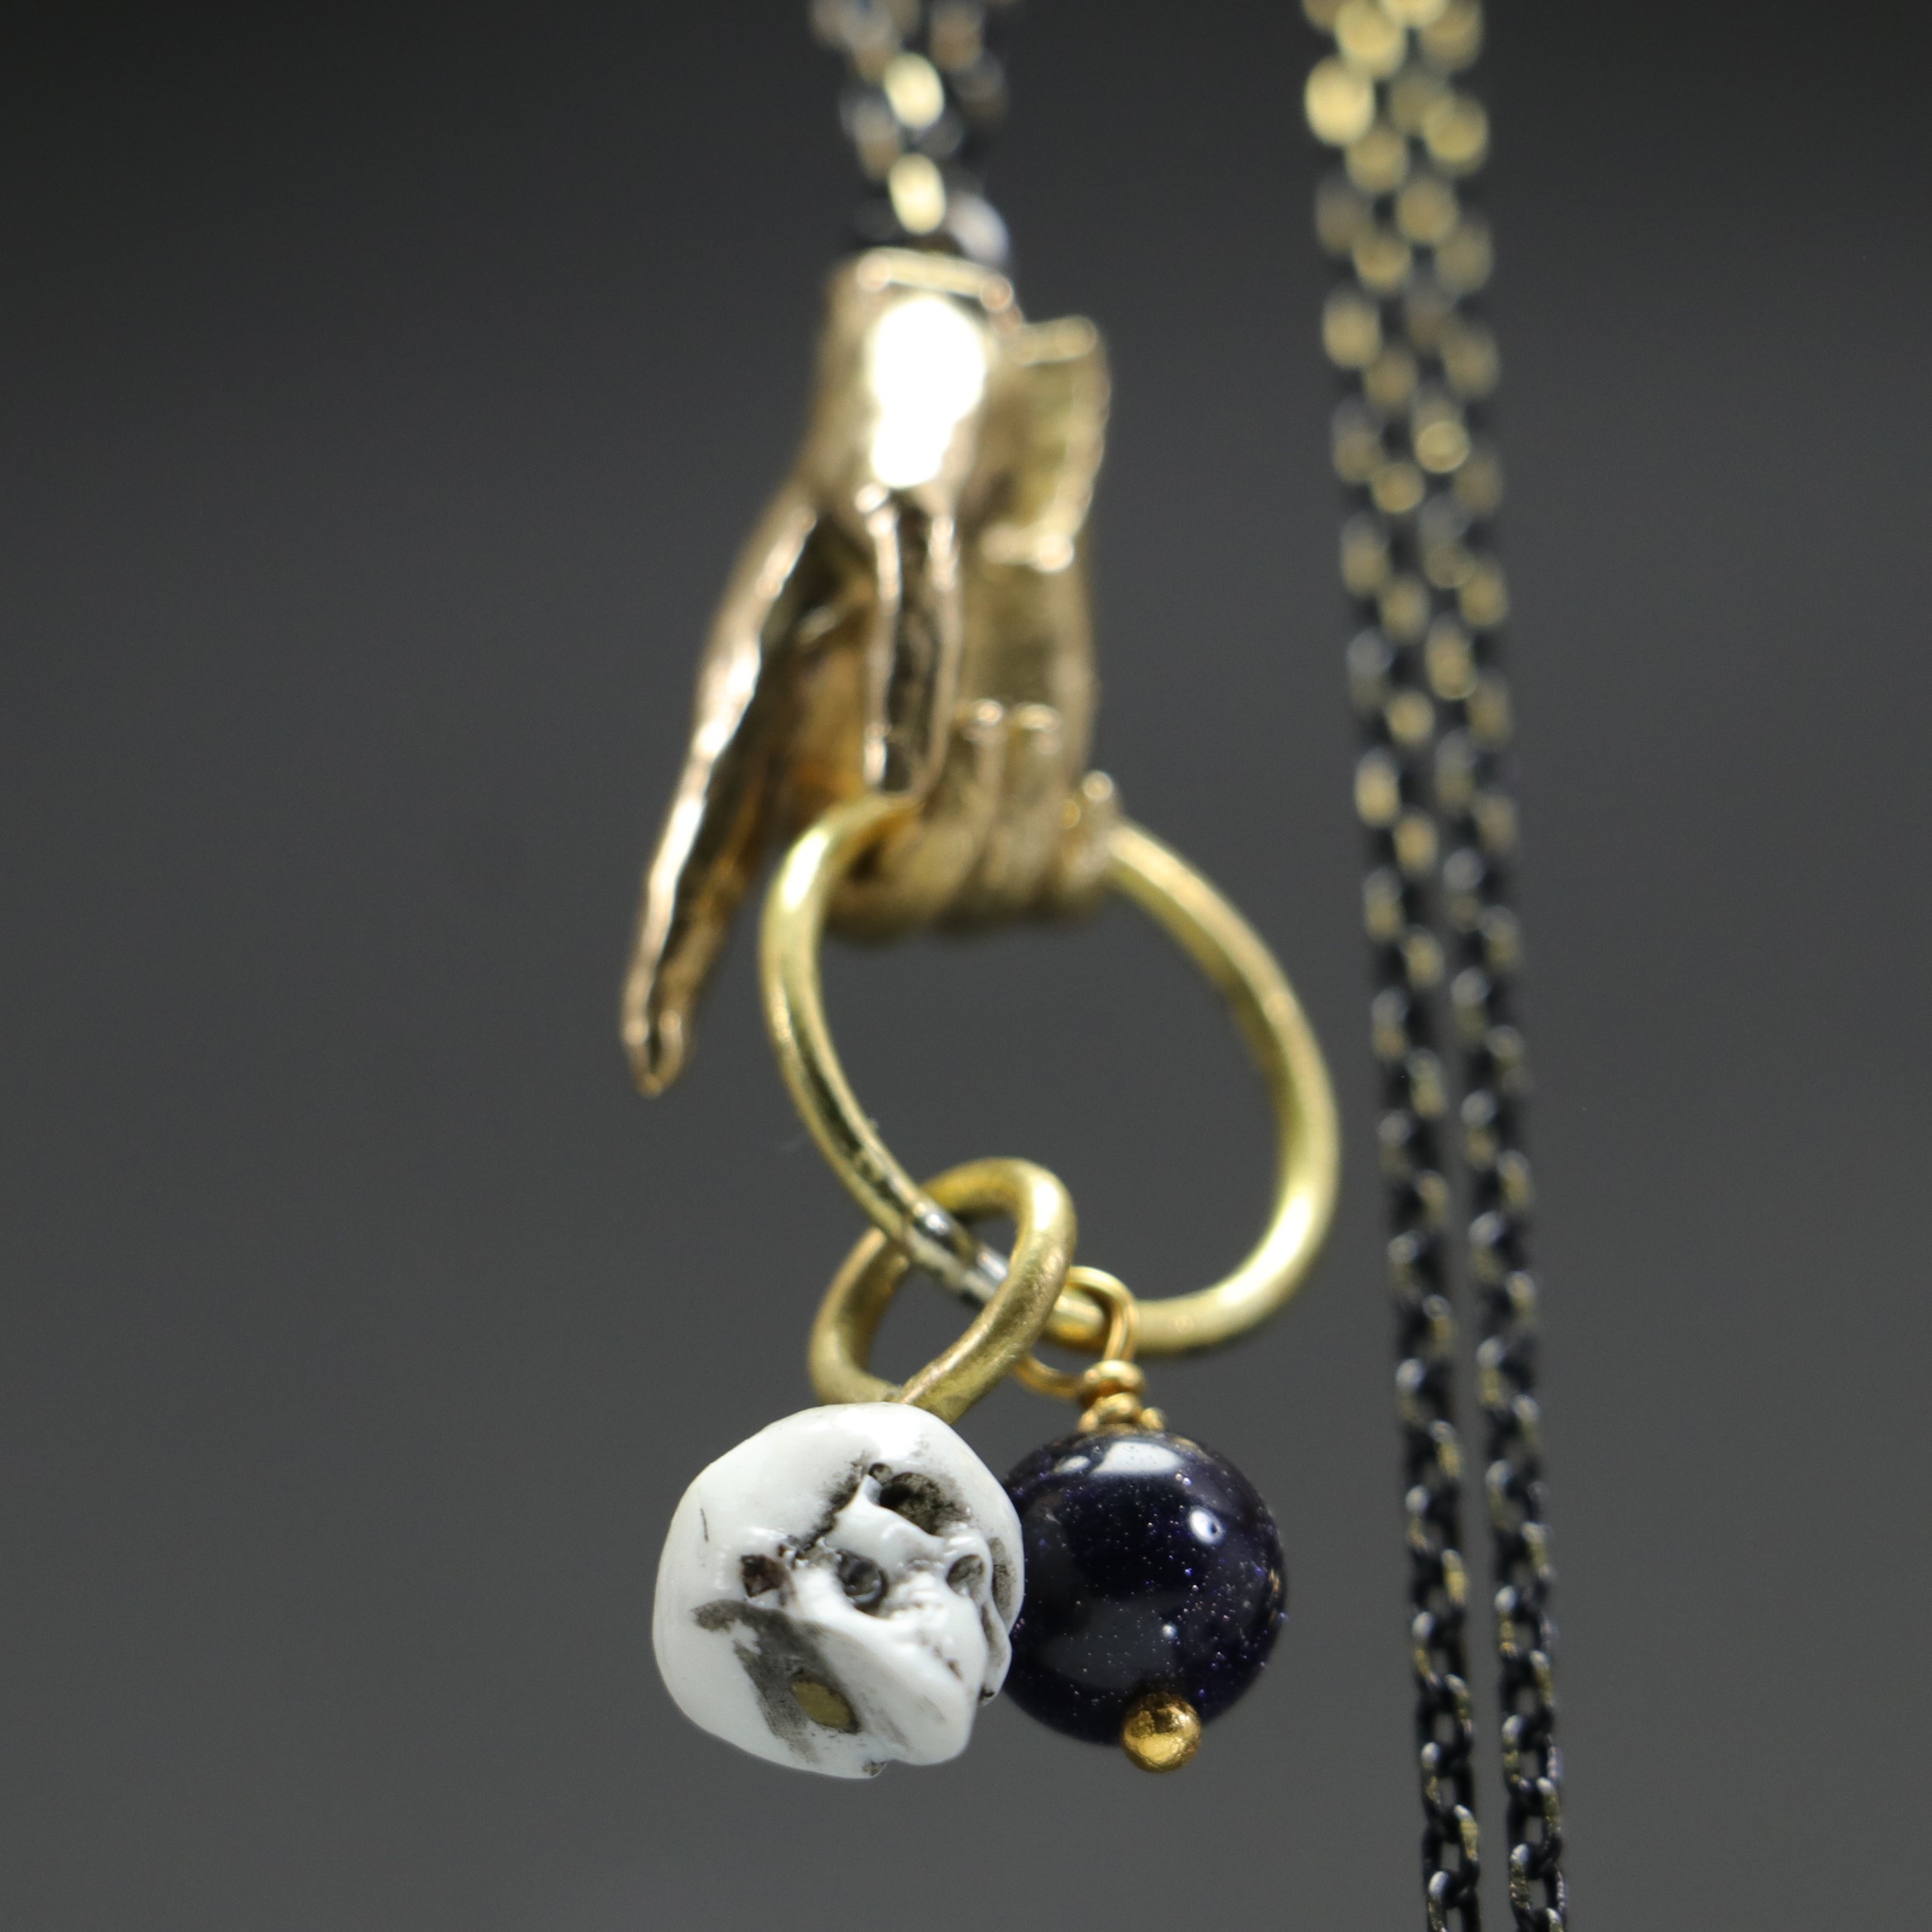 Hand and Skull Star Stone Necklace